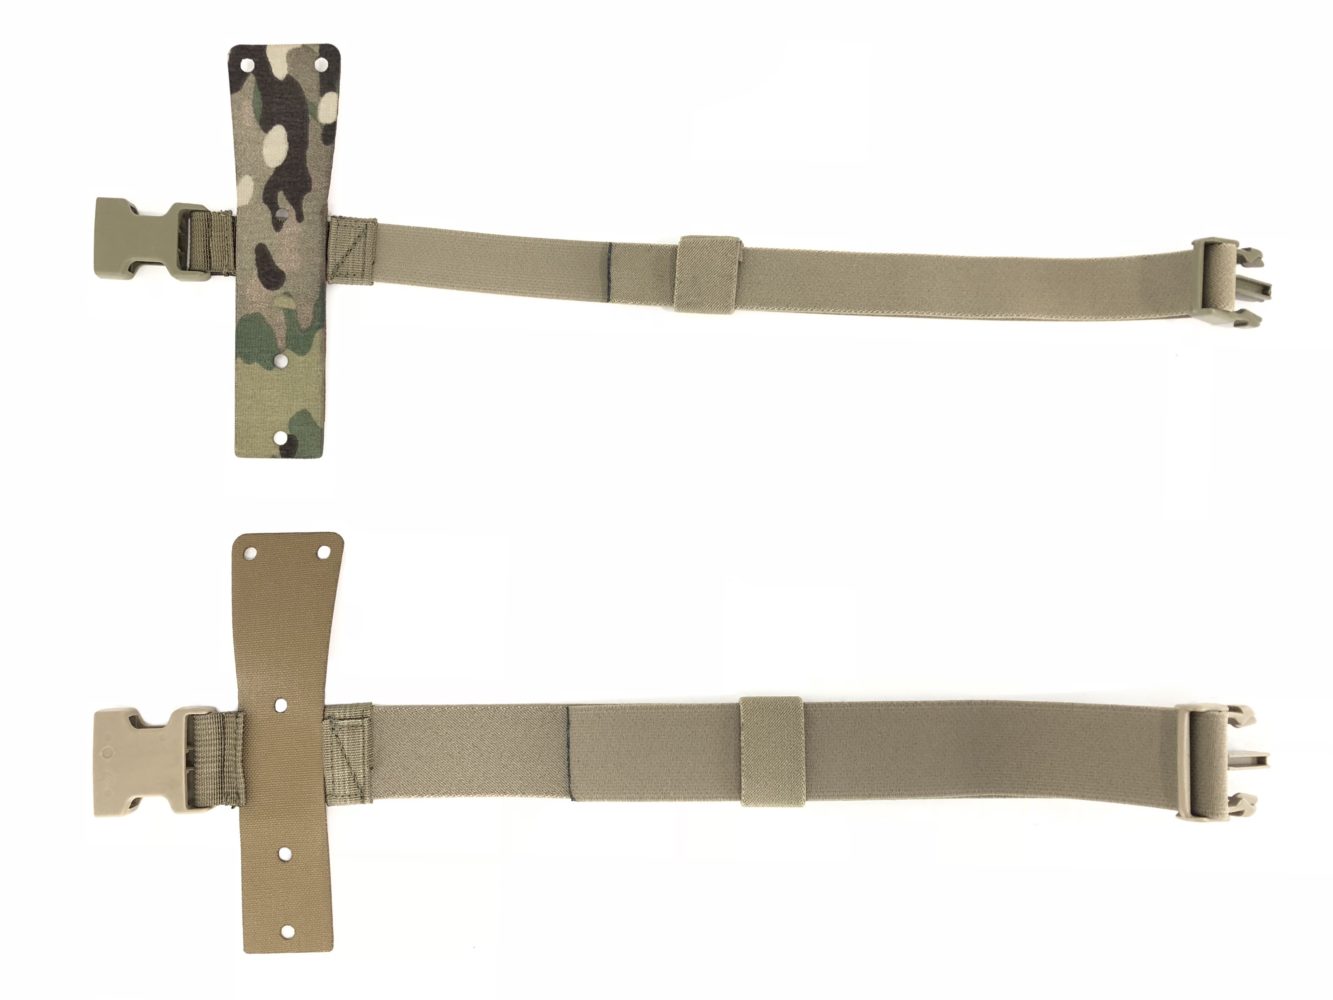 New from Arbor Arms USA – Safariland Holster Single Leg Strap